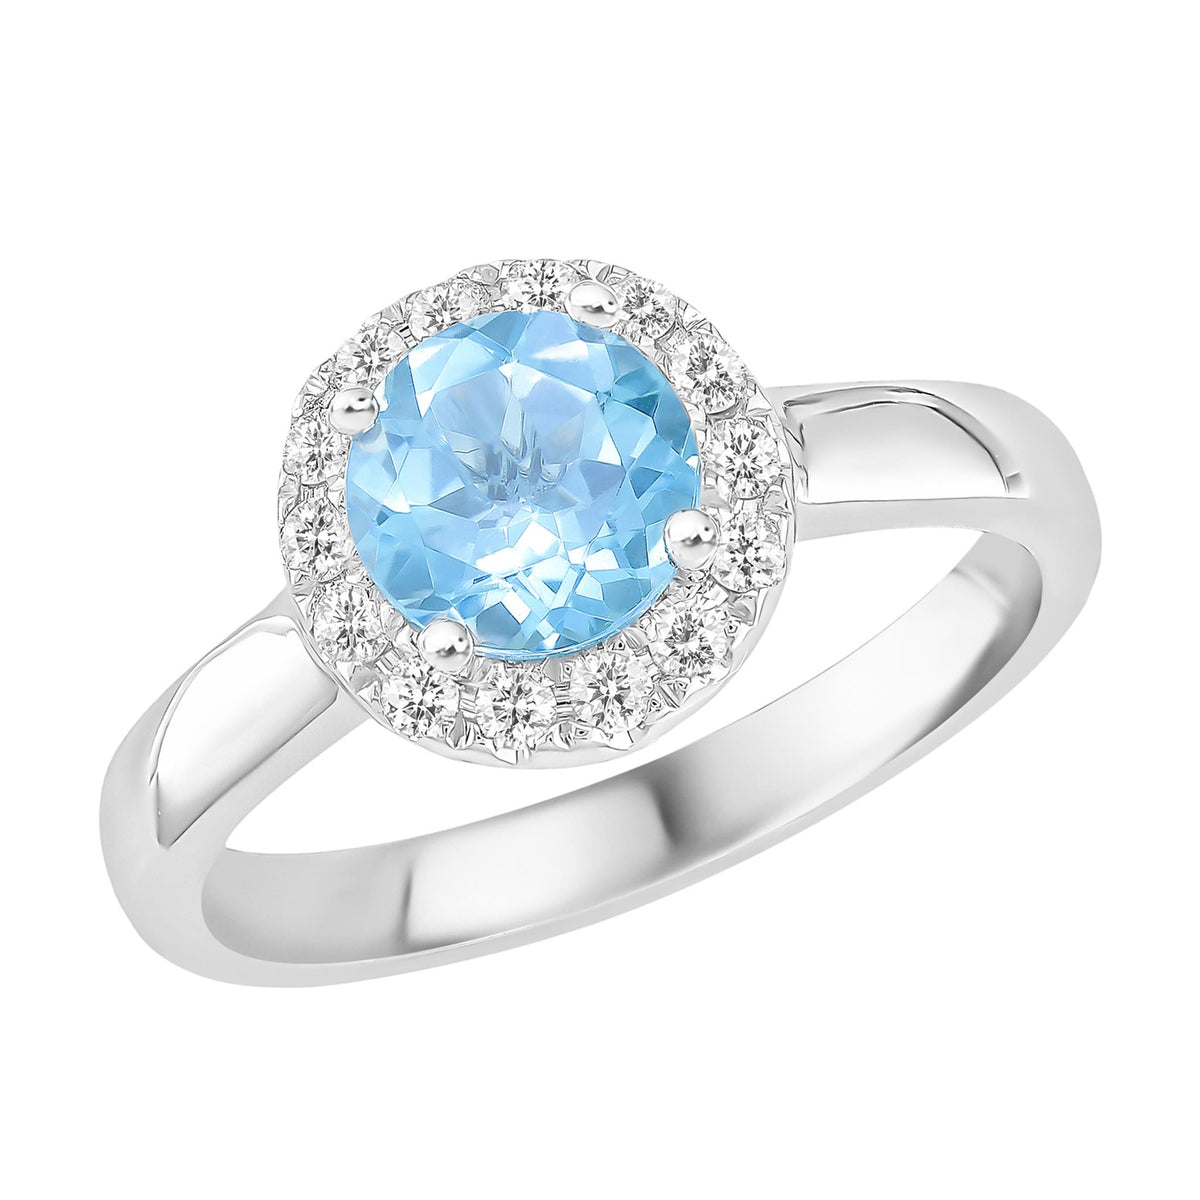 14Kt White Gold Halo Gemstone Ring With 0.91ct Blue Topaz